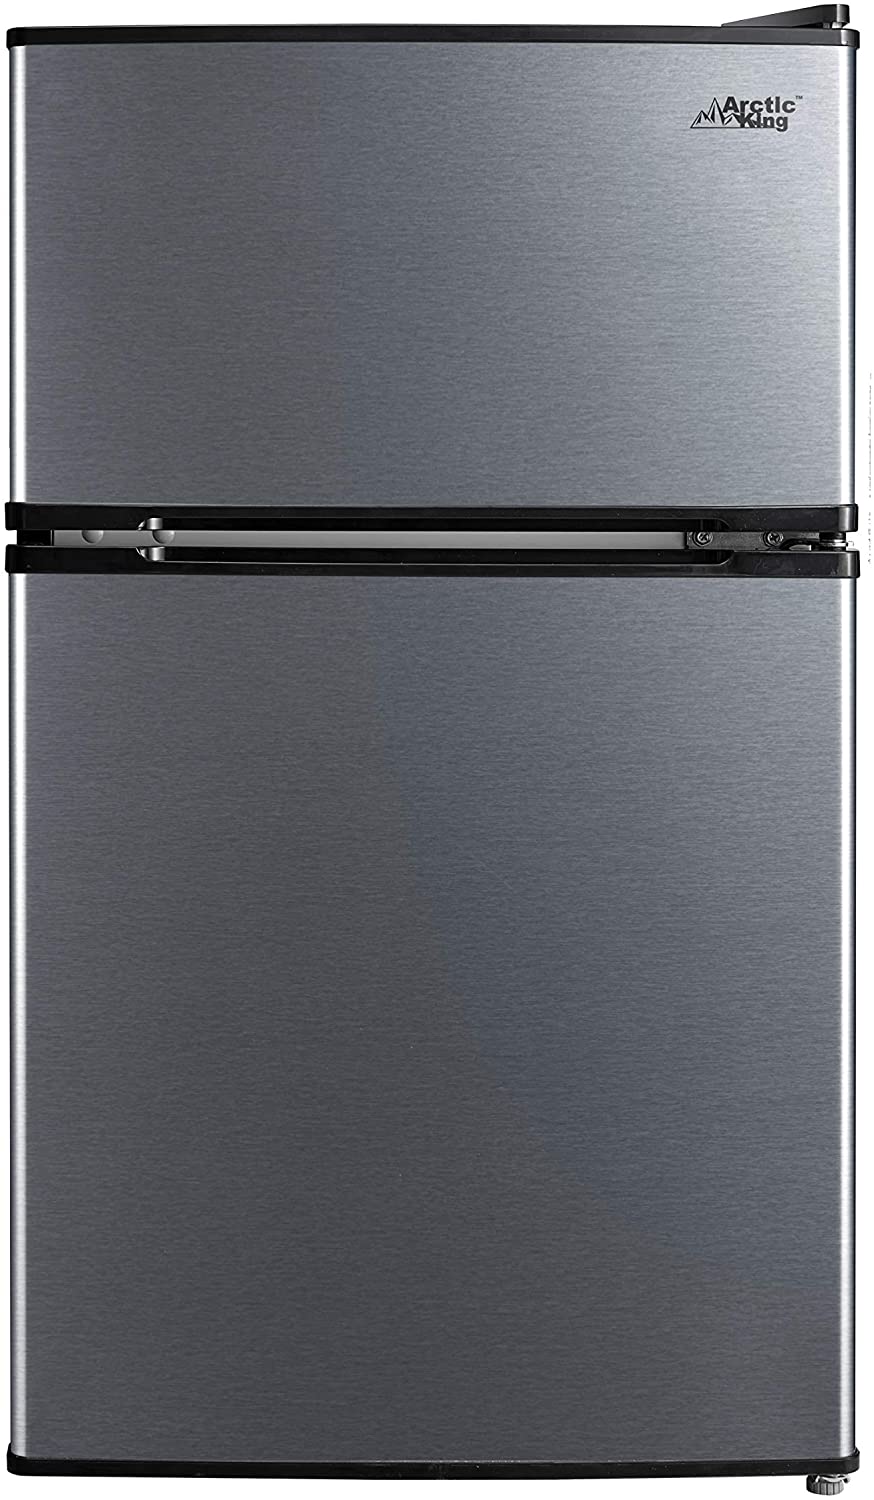 Review Arctic King 3.2 Mini Fridge Compact Refrigerator with